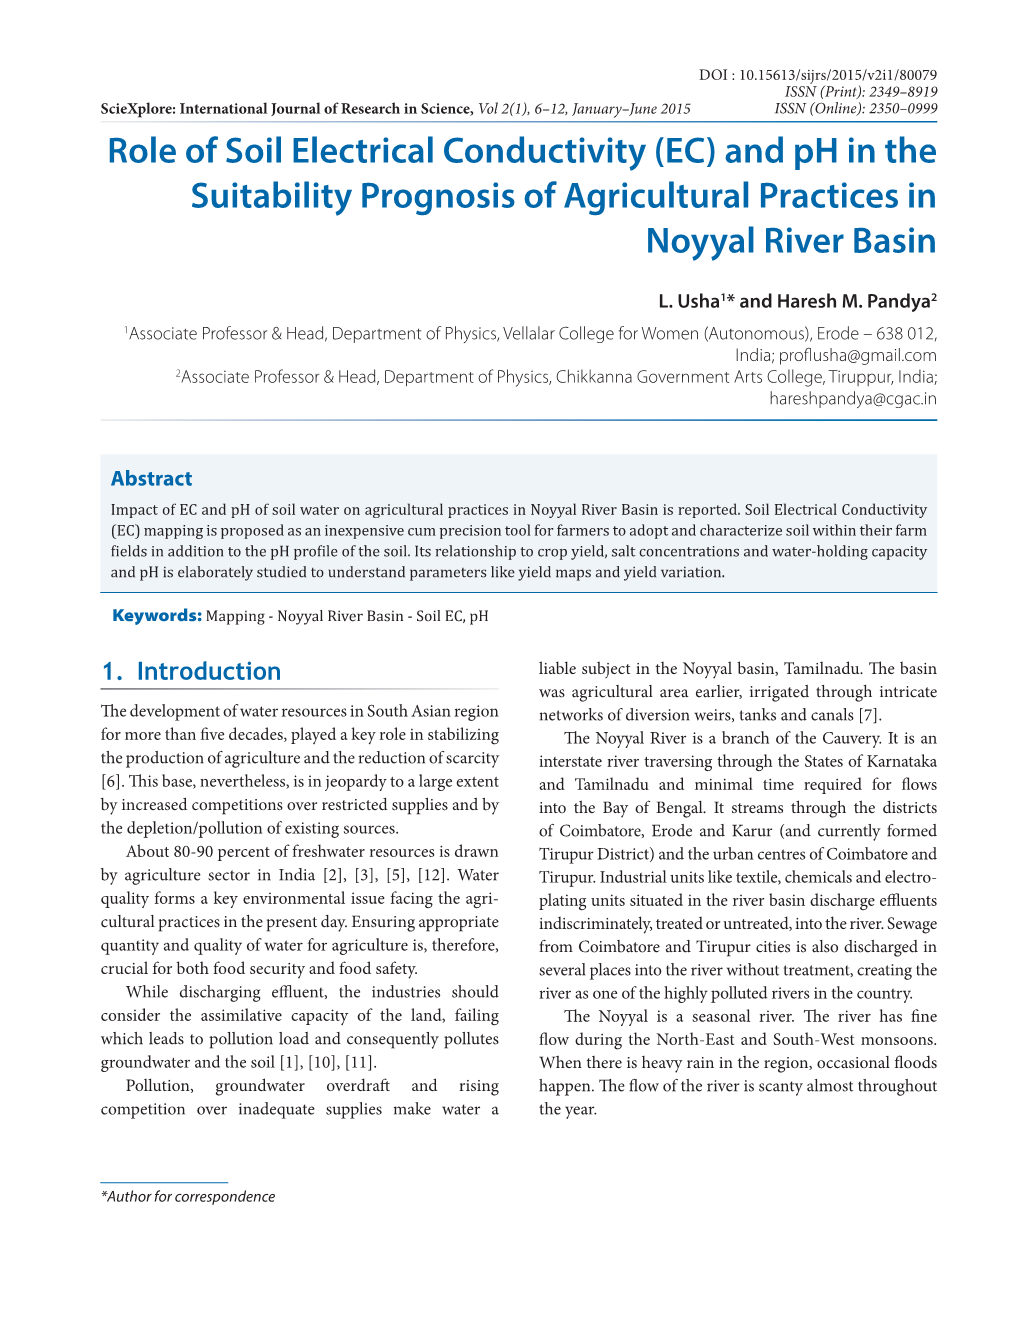 Role of Soil Electrical Conductivity (EC) and Ph in the Suitability Prognosis of Agricultural Practices in Noyyal River Basin